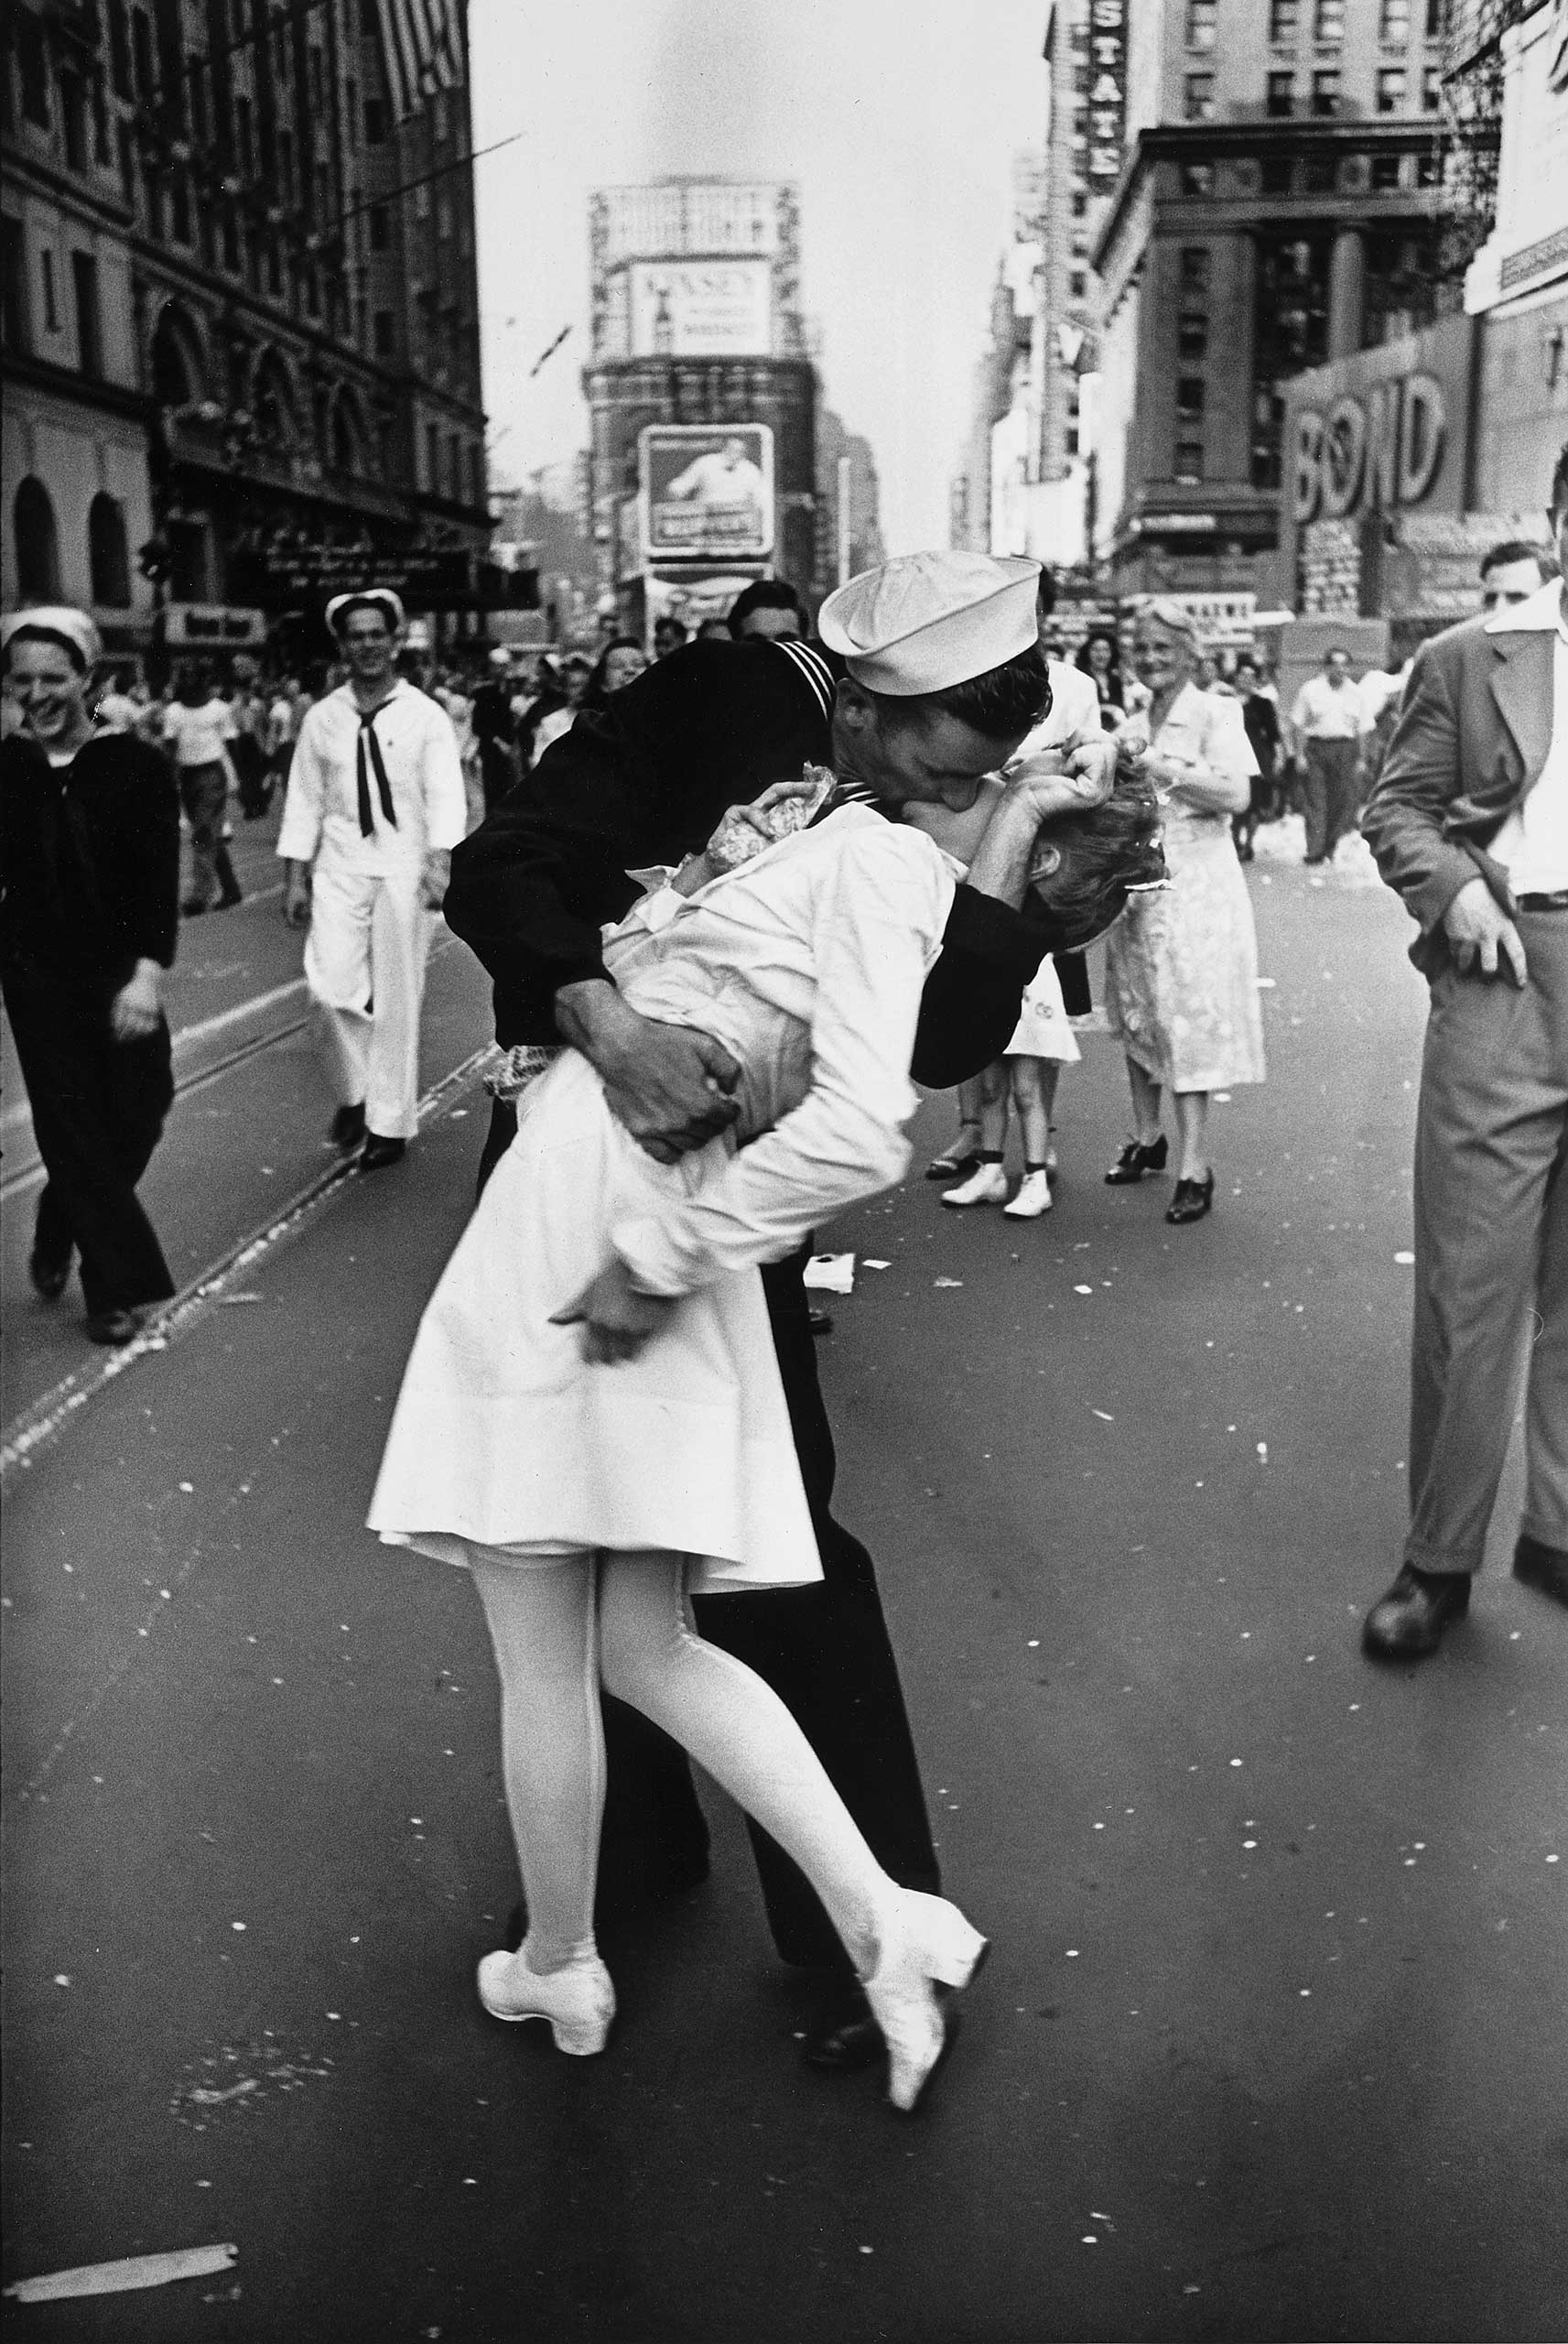 1945 | On August 14, 1945 — VJ Day — a jubilant sailor plants a kiss on a nurse in Times Square to celebrate the Allies' long- awaited World War II victory over Japan. Originally published (not as a cover shot, as most people assume today, but as just one in a series of  VJ Day victory celebration  images featured in the middle of the magazine) in the August 27, 1945, issue of LIFE.